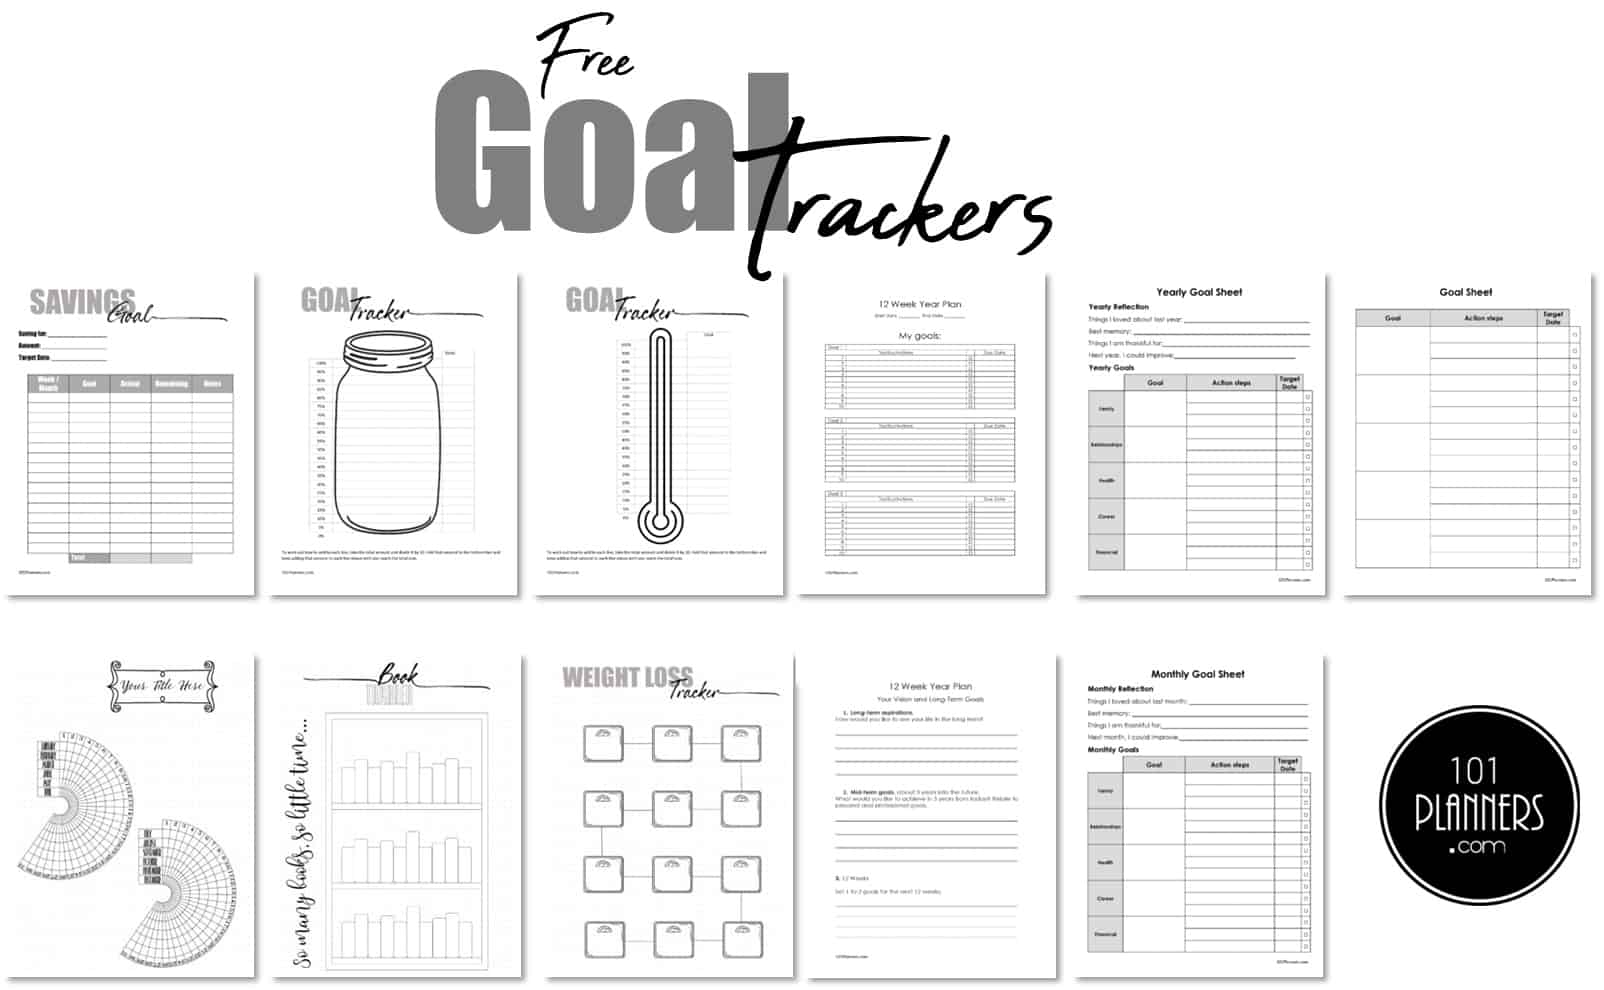 9 Must-Have Goal-Planning Tools You Need in 2020